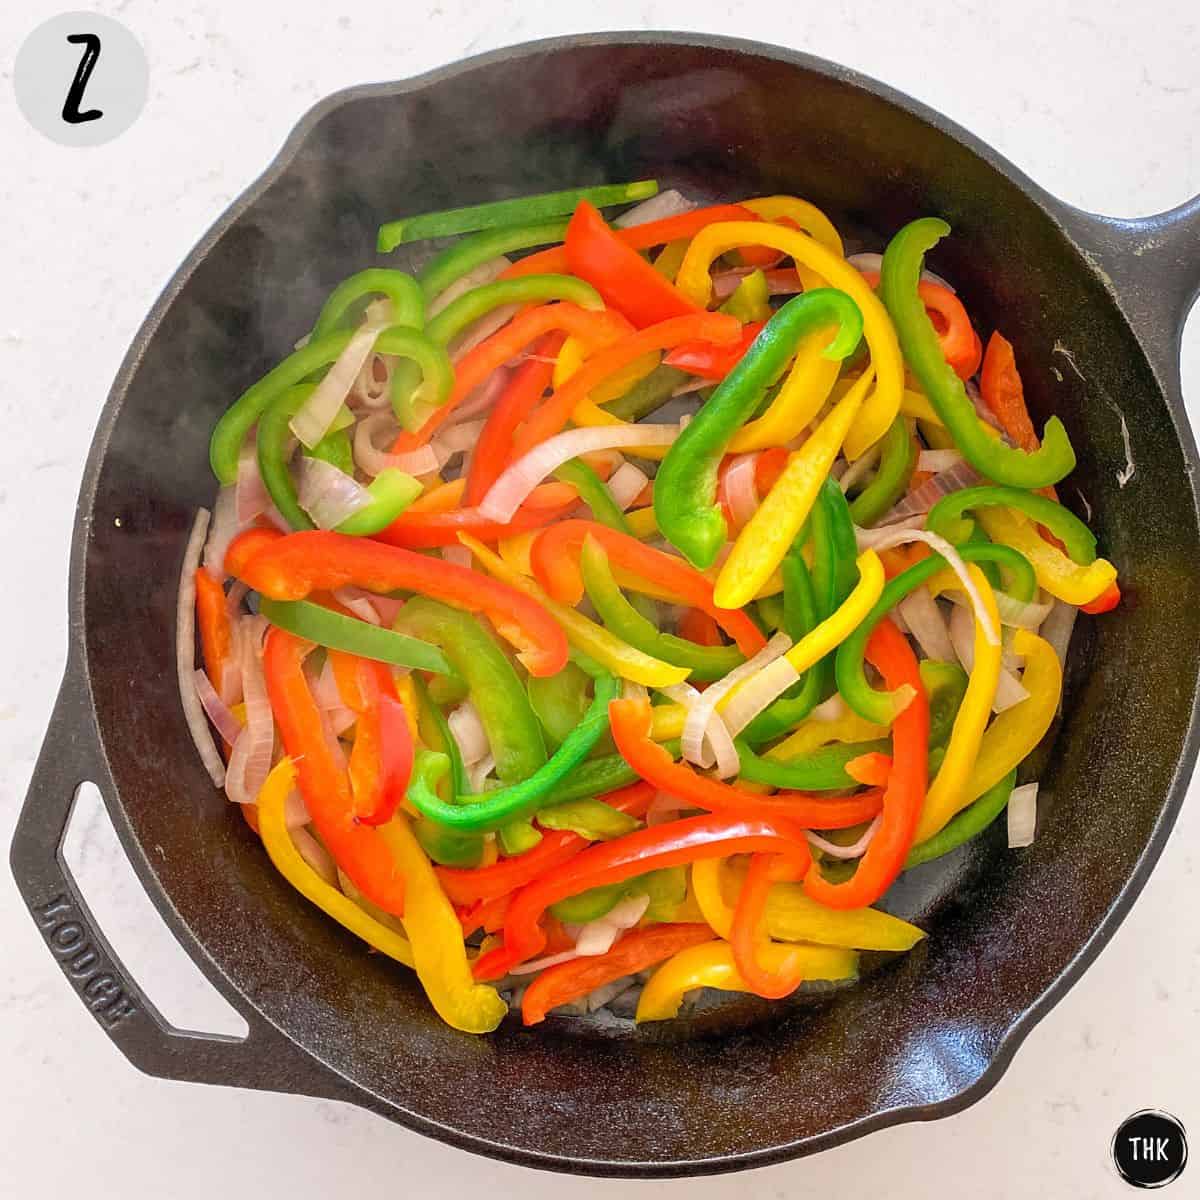 Sautéed peppers and onion in cast iron pan.